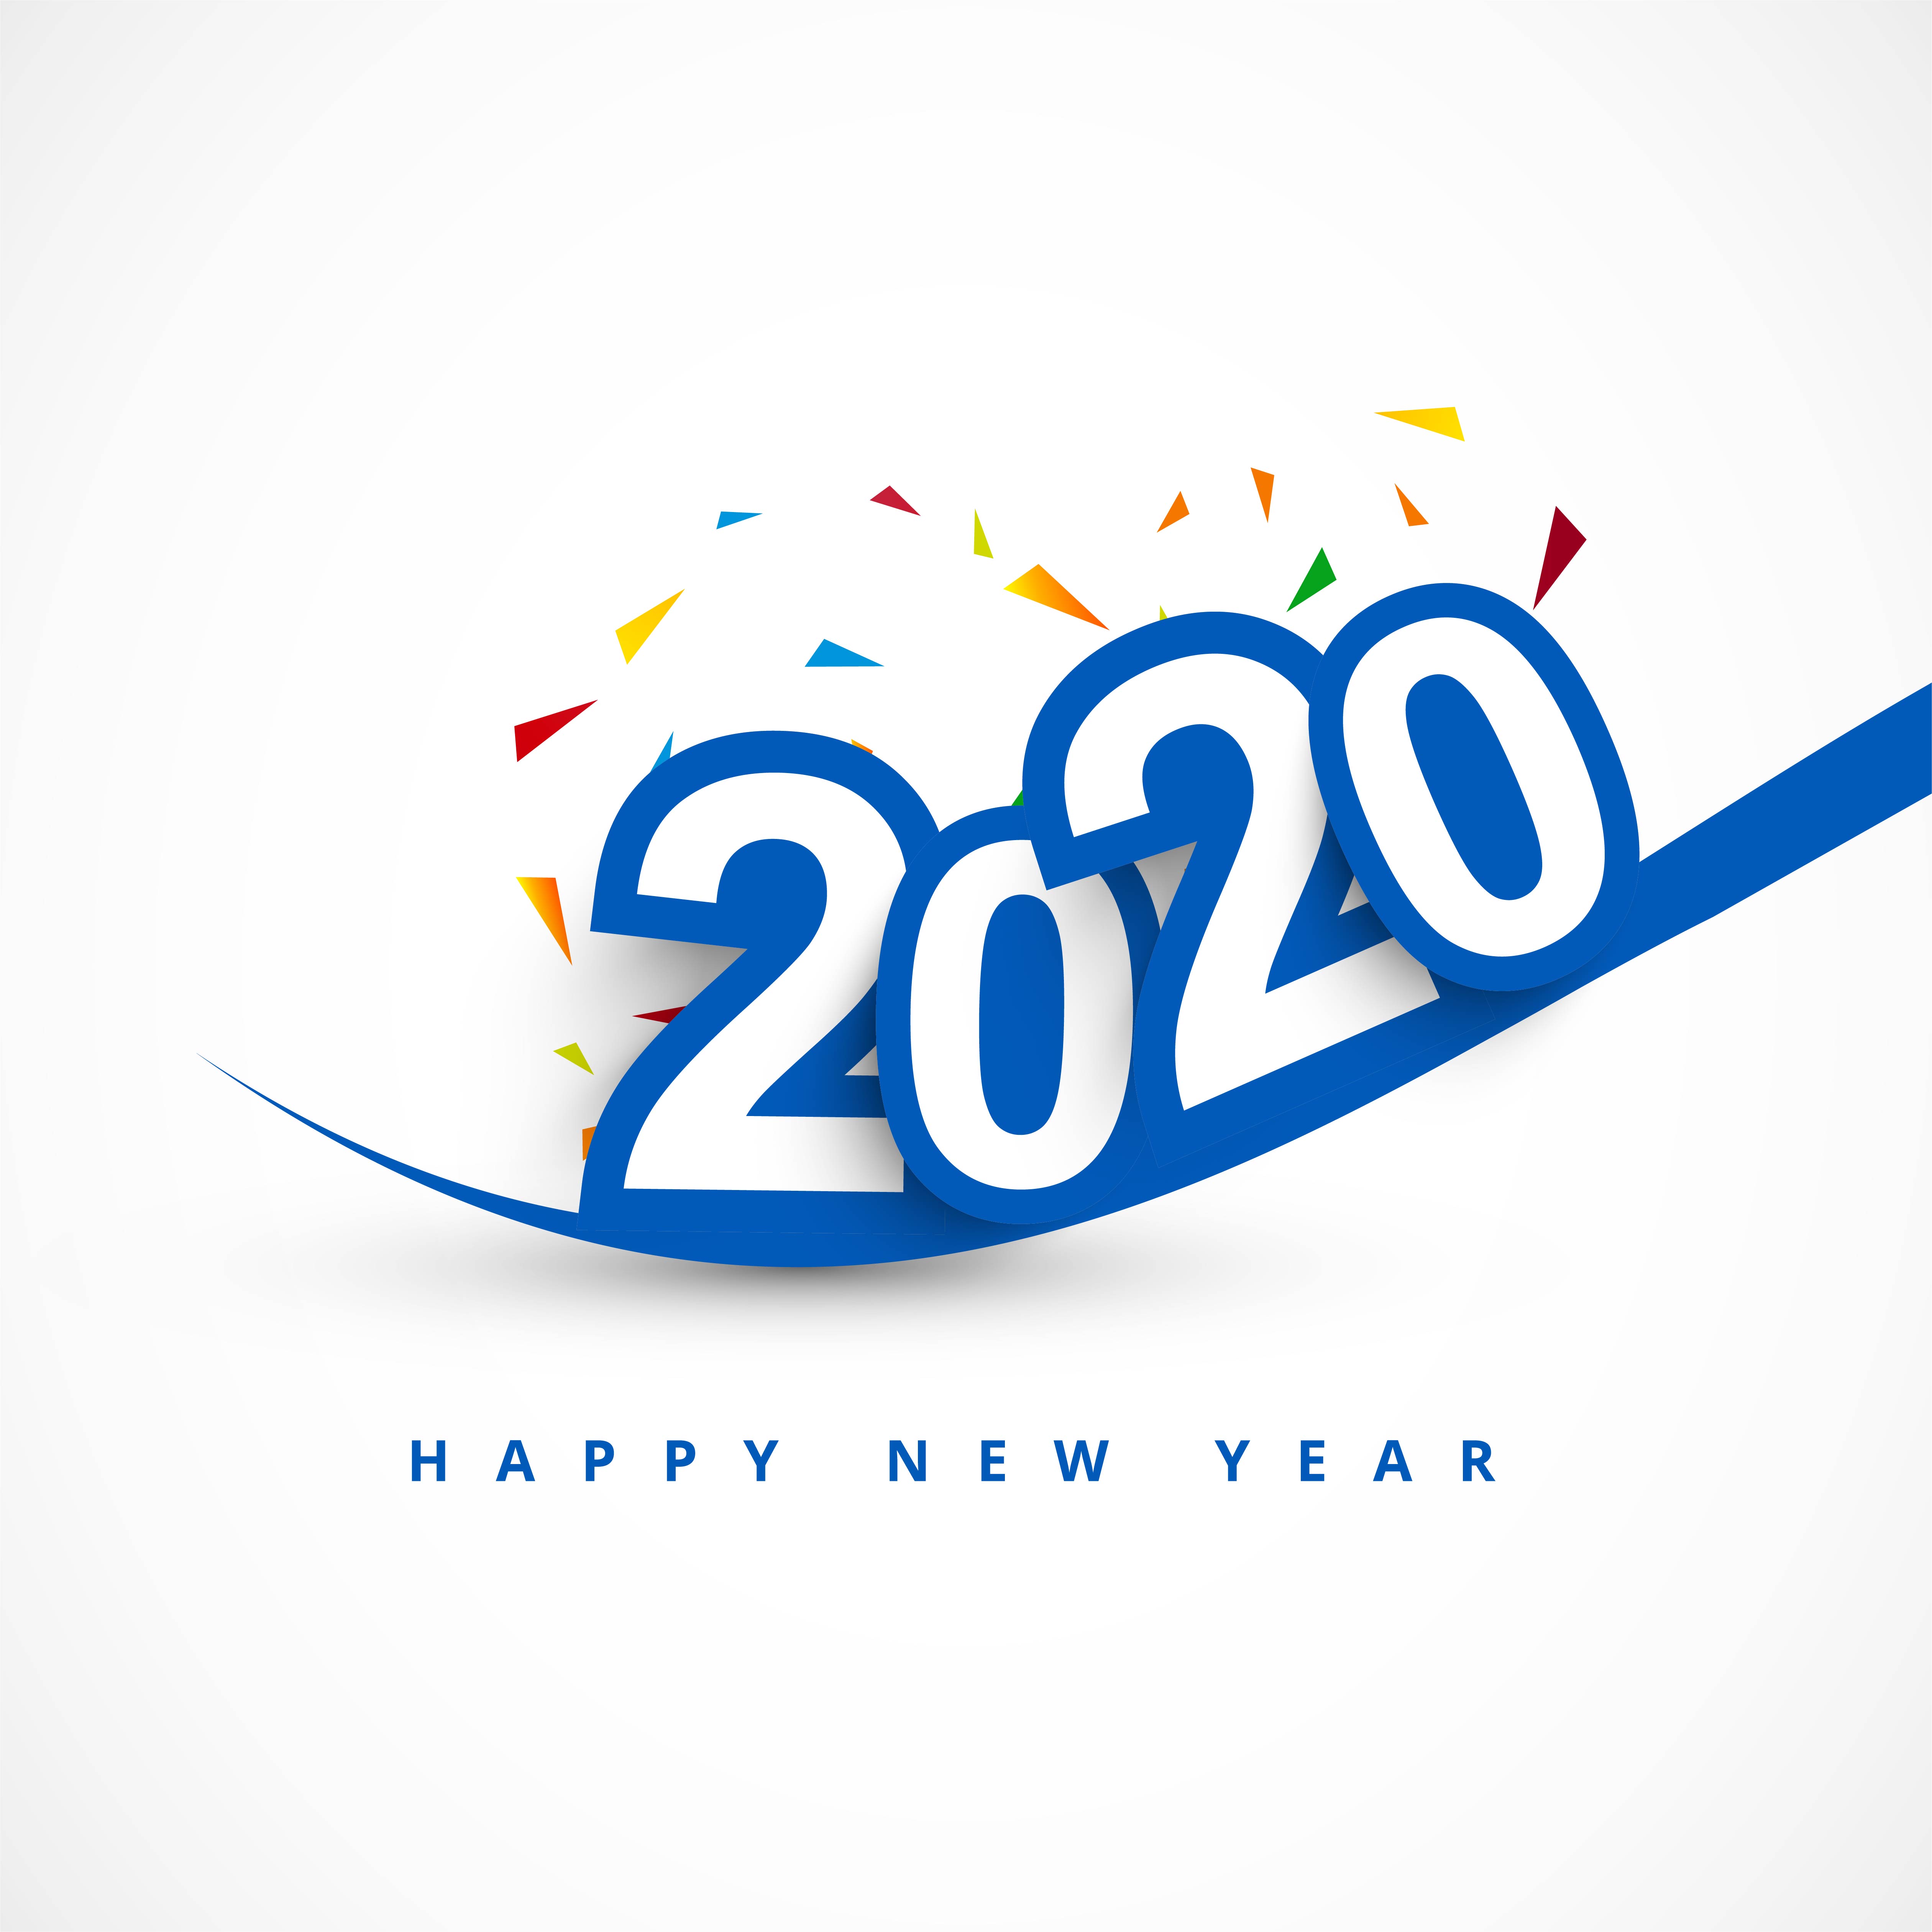 new year creative 2020 text greeting card - download free